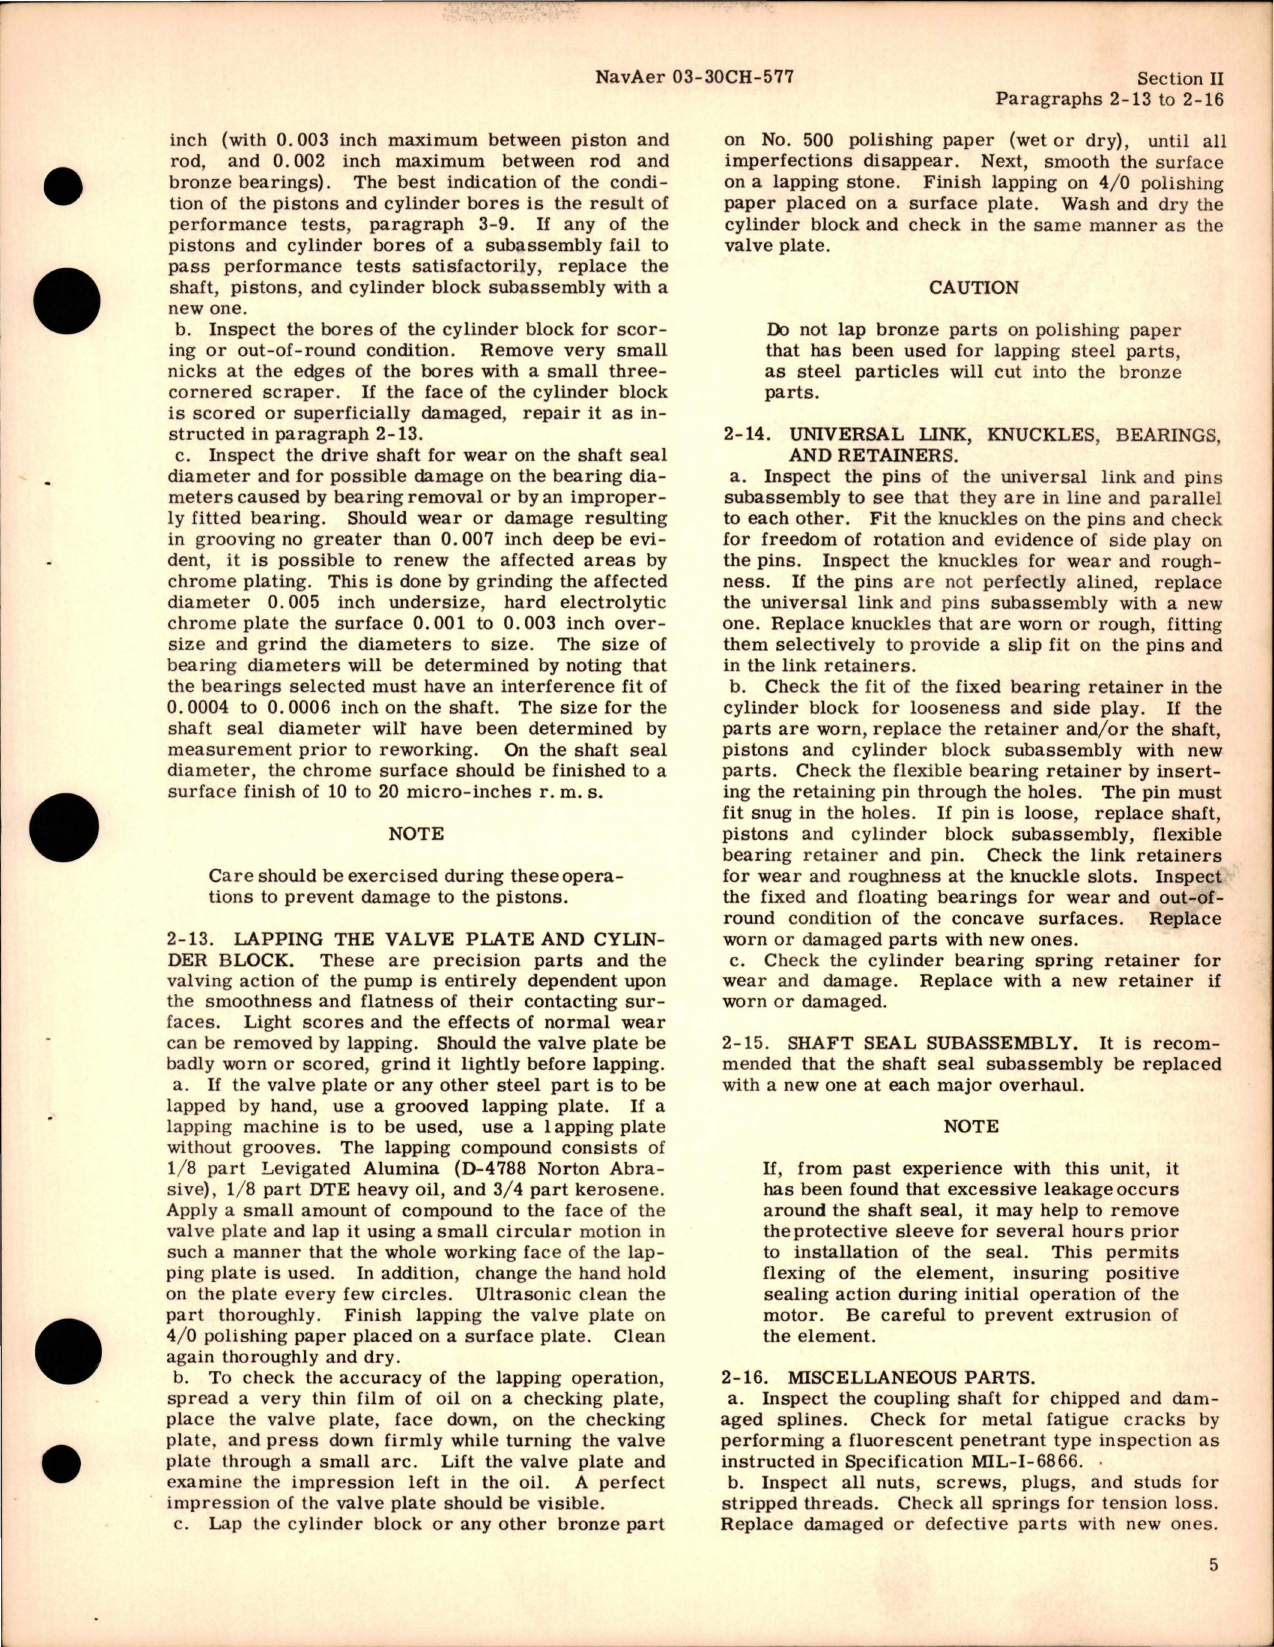 Sample page 9 from AirCorps Library document: Overhaul Instructions for Constant Displacement Hydraulic Pump Assemblies